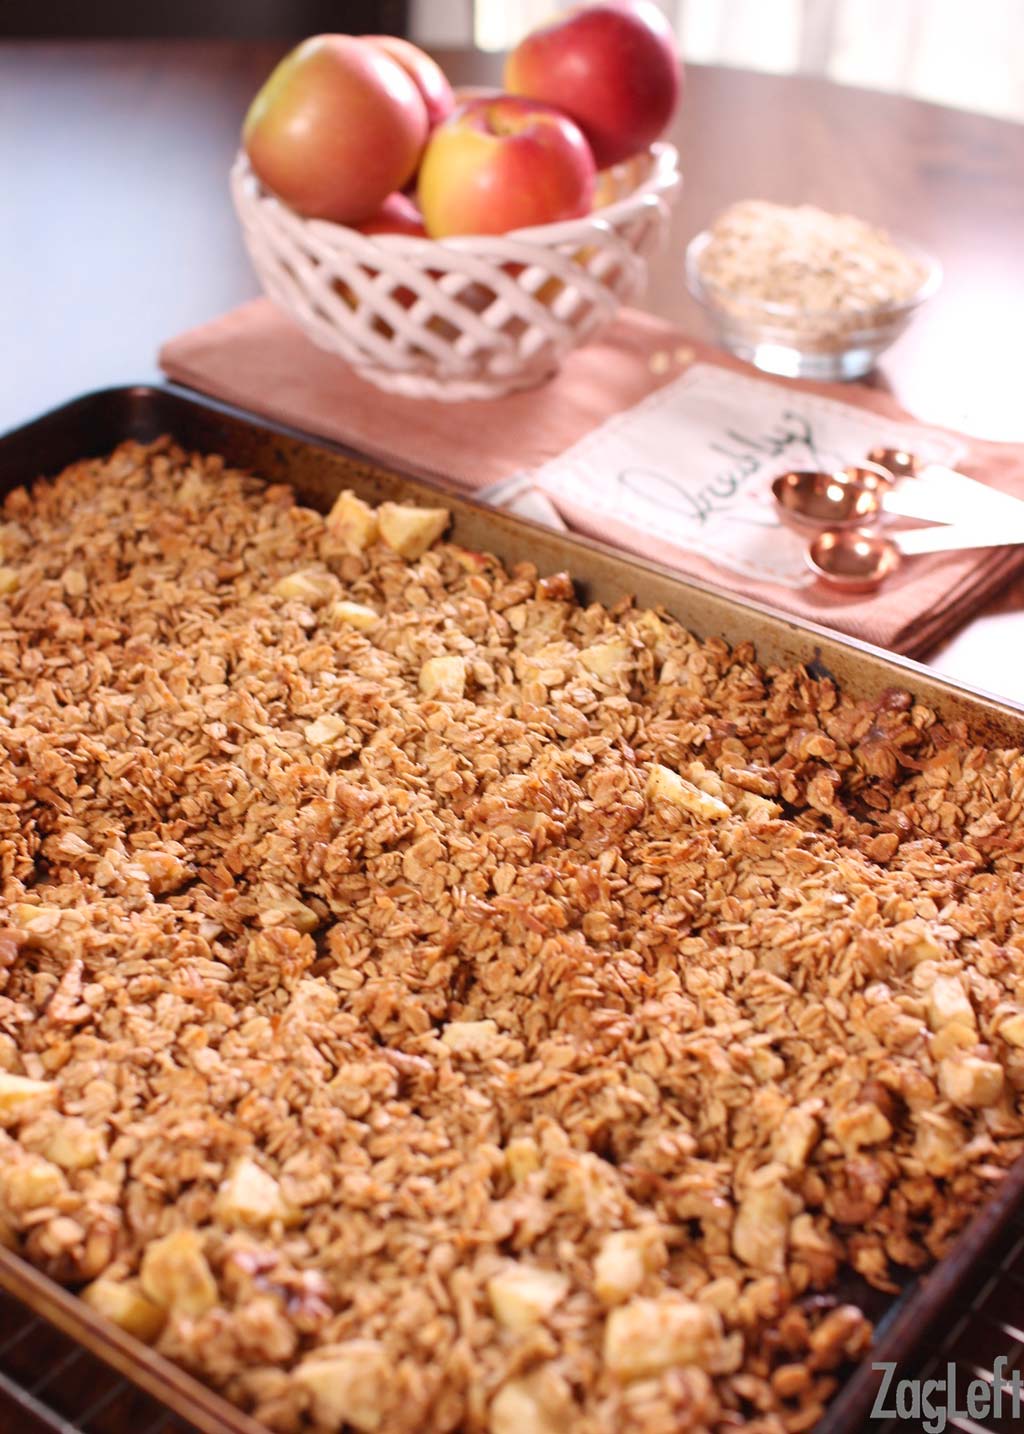 Apple granola on a baking sheet with a bowl of fresh apples, a small bowl of oats, and measuring spoons in the background.